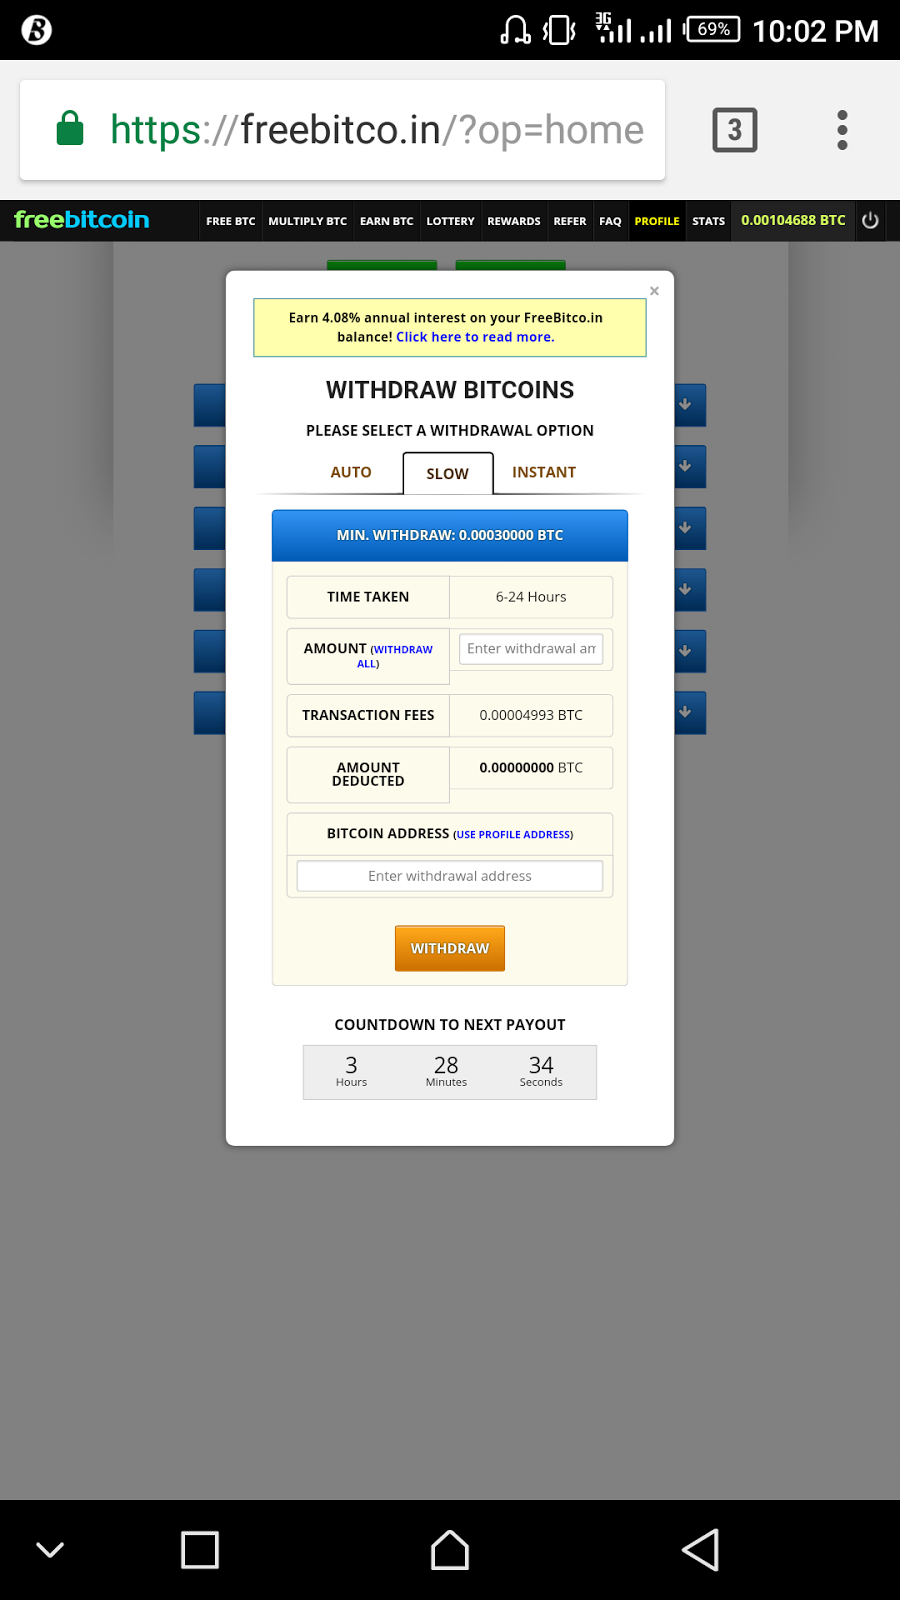 Picture Proof Start Earning Free Bitcoin Every Hour From Freebitcoin - 